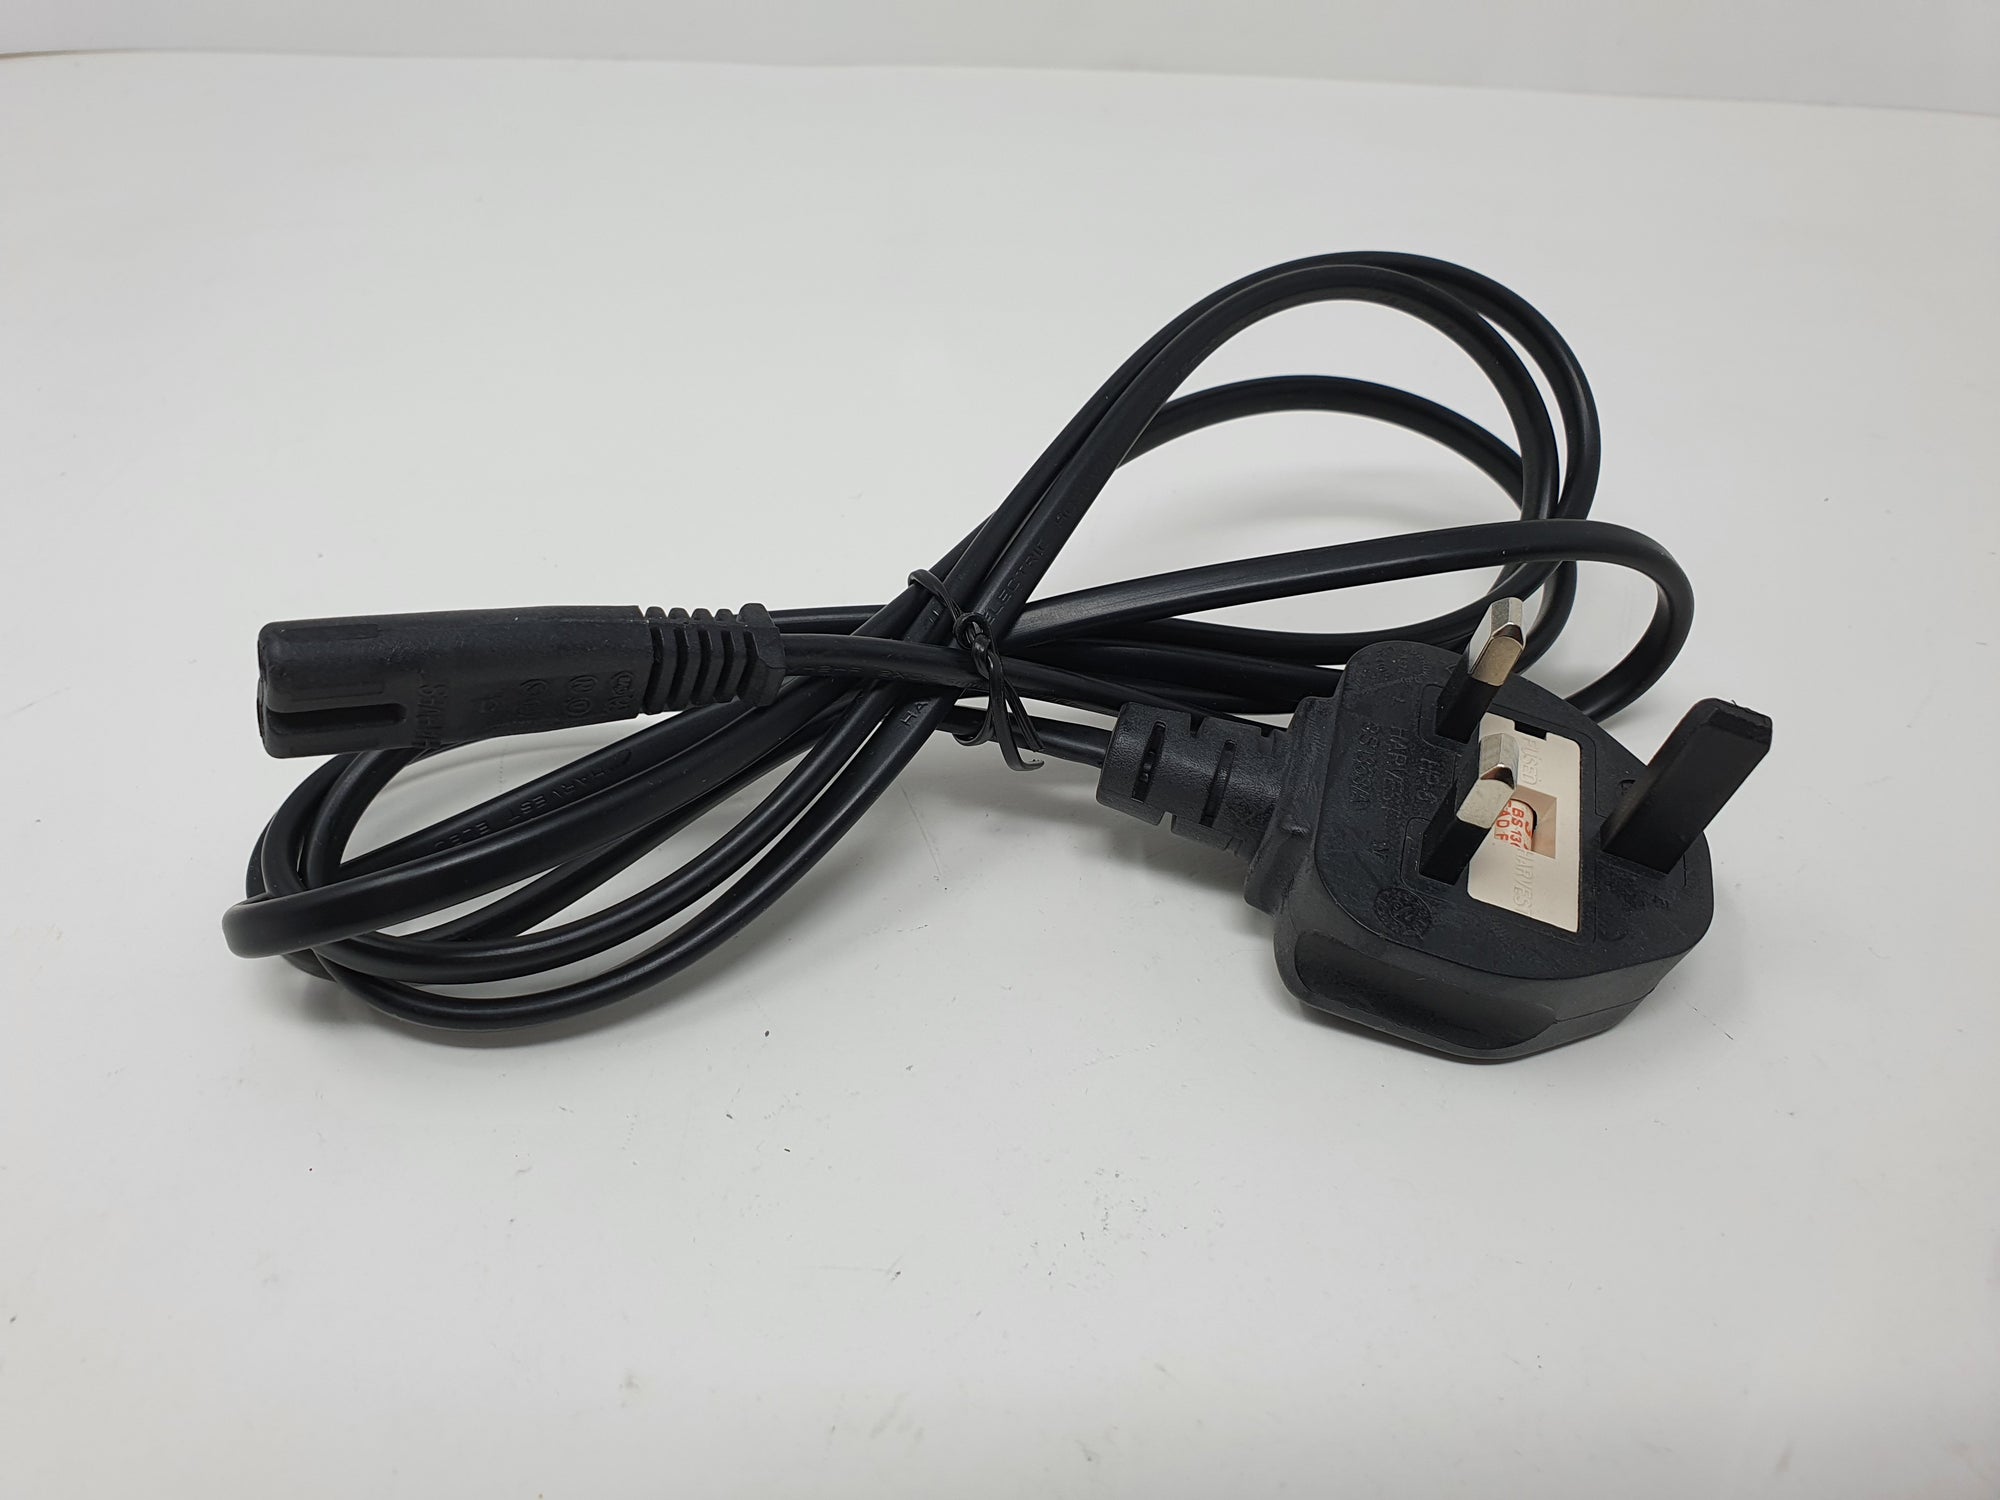 Mains Power Cable UK PLUG Figure 8 2PIN For Laptop DVD RADIO PS3 PS4 PS5